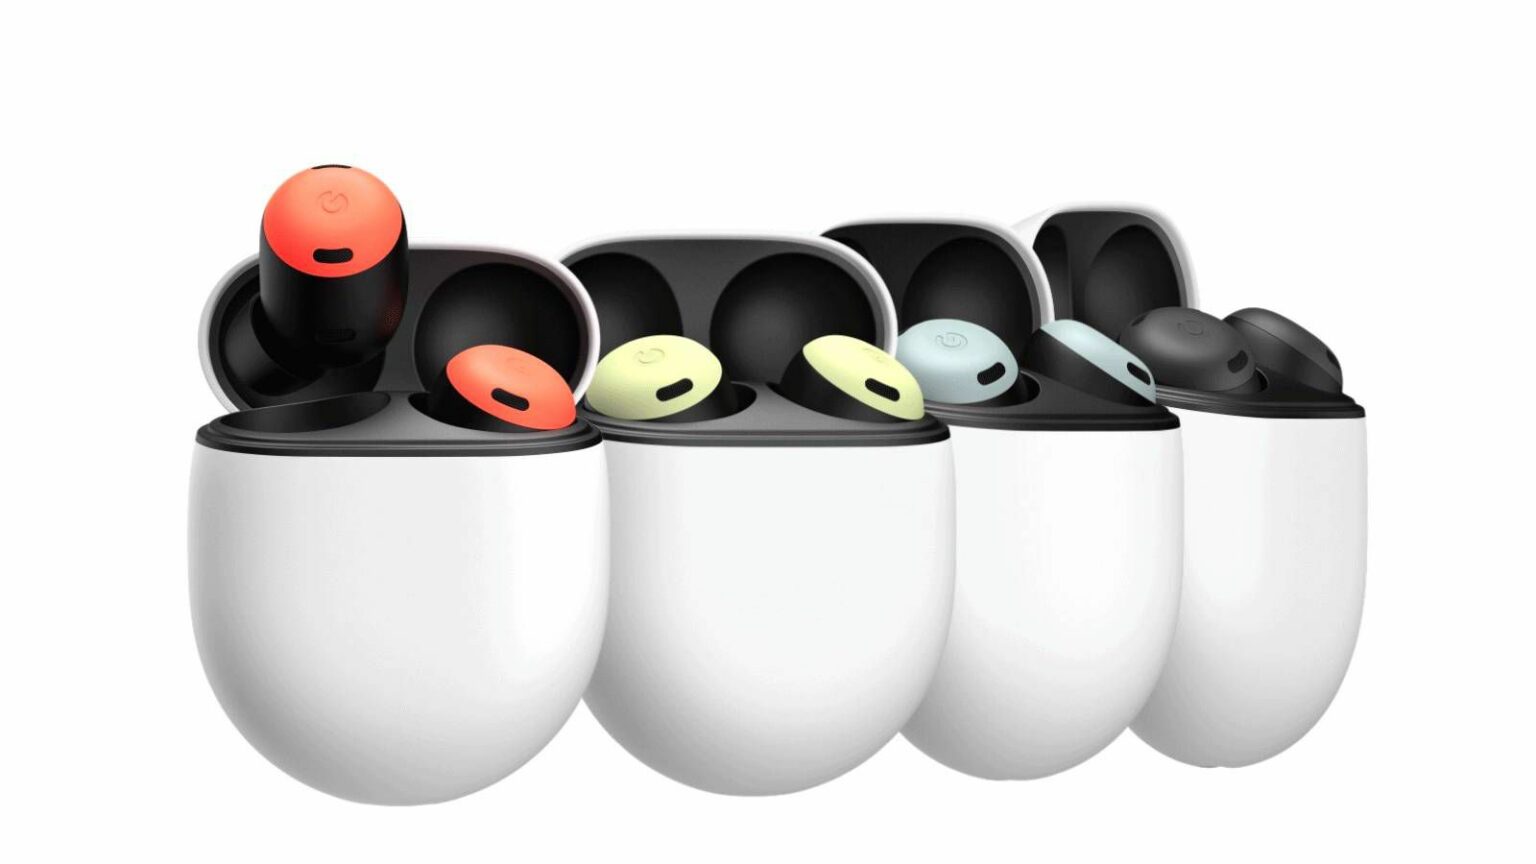 Google's top new earbuds will come in several colors.